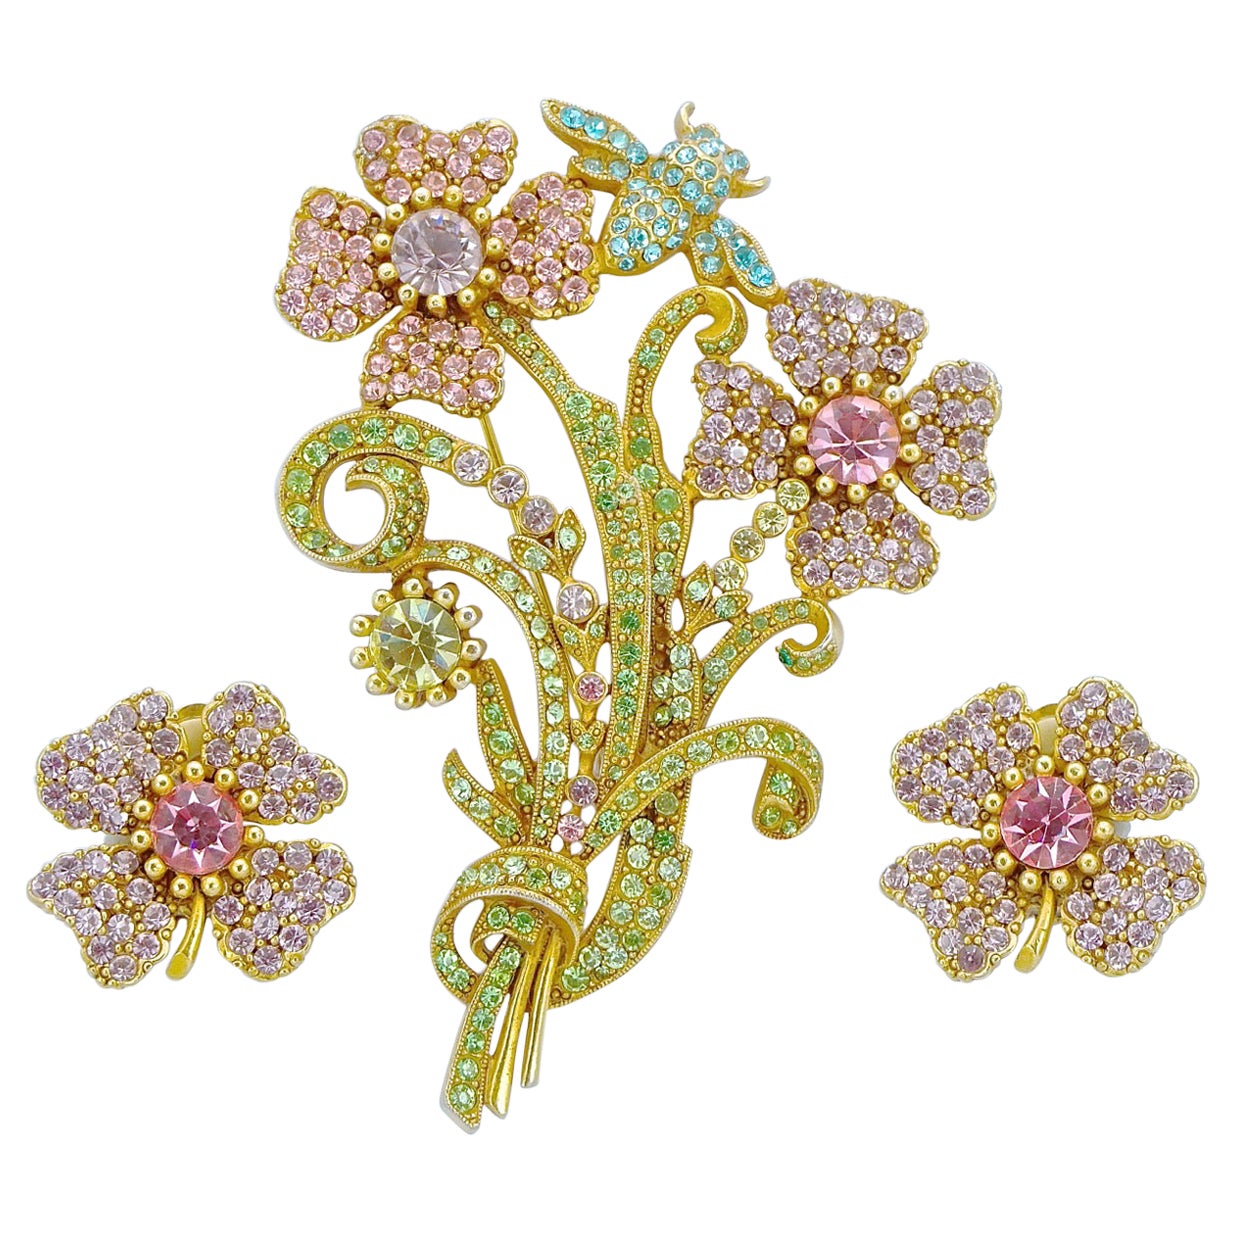 1950's Europe gold-tone metal BROOCH flowers with lilac crystals 